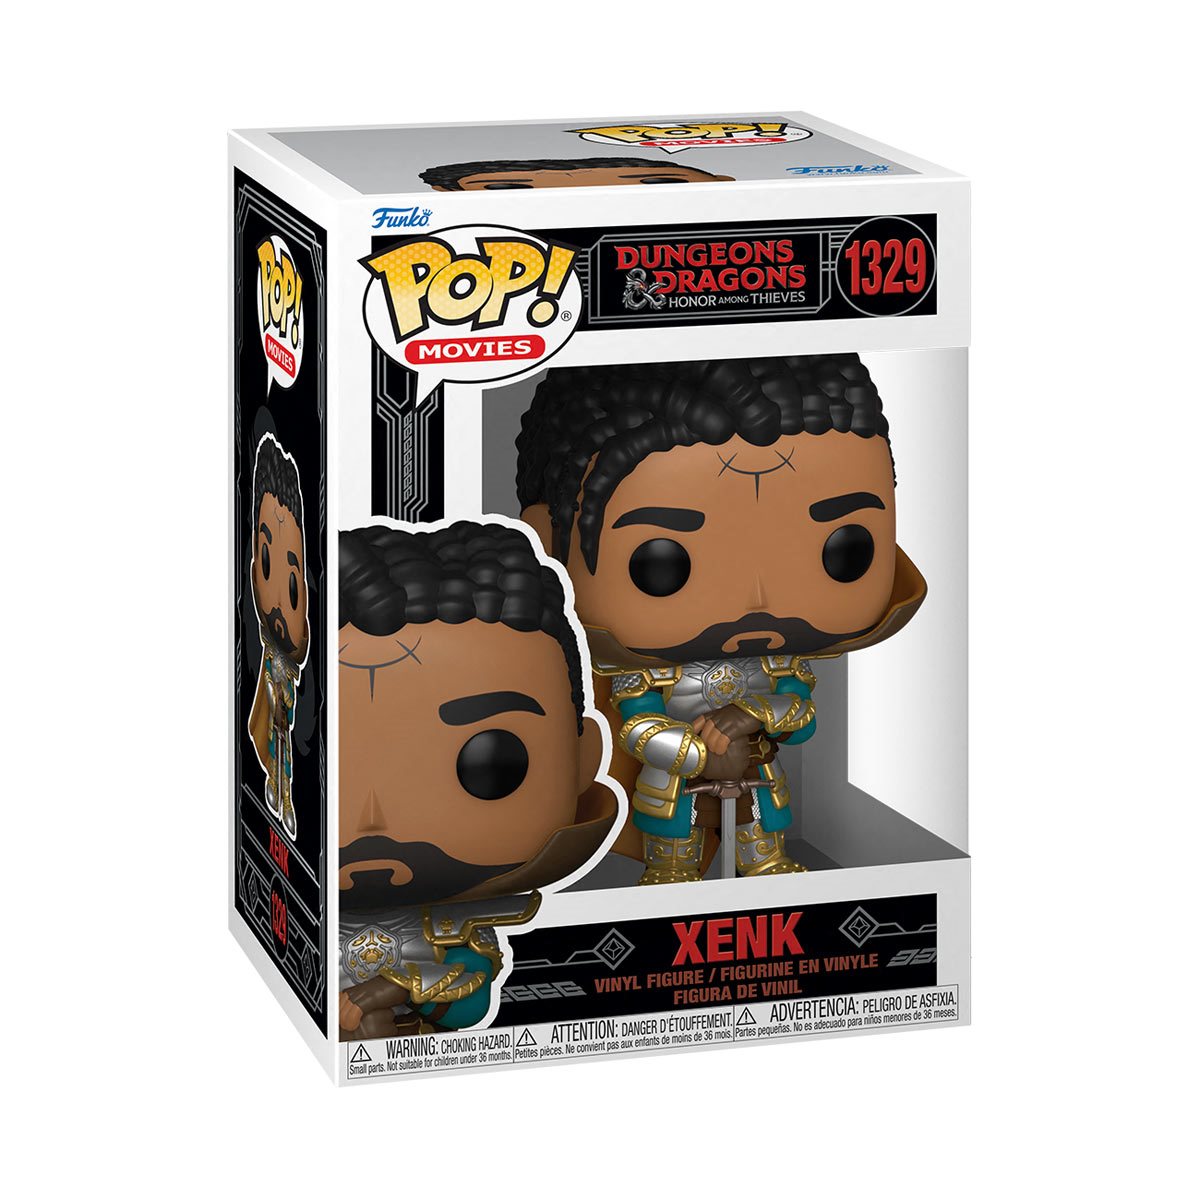 Funko Pop Movies: Dungeons And Dragons - Xenk